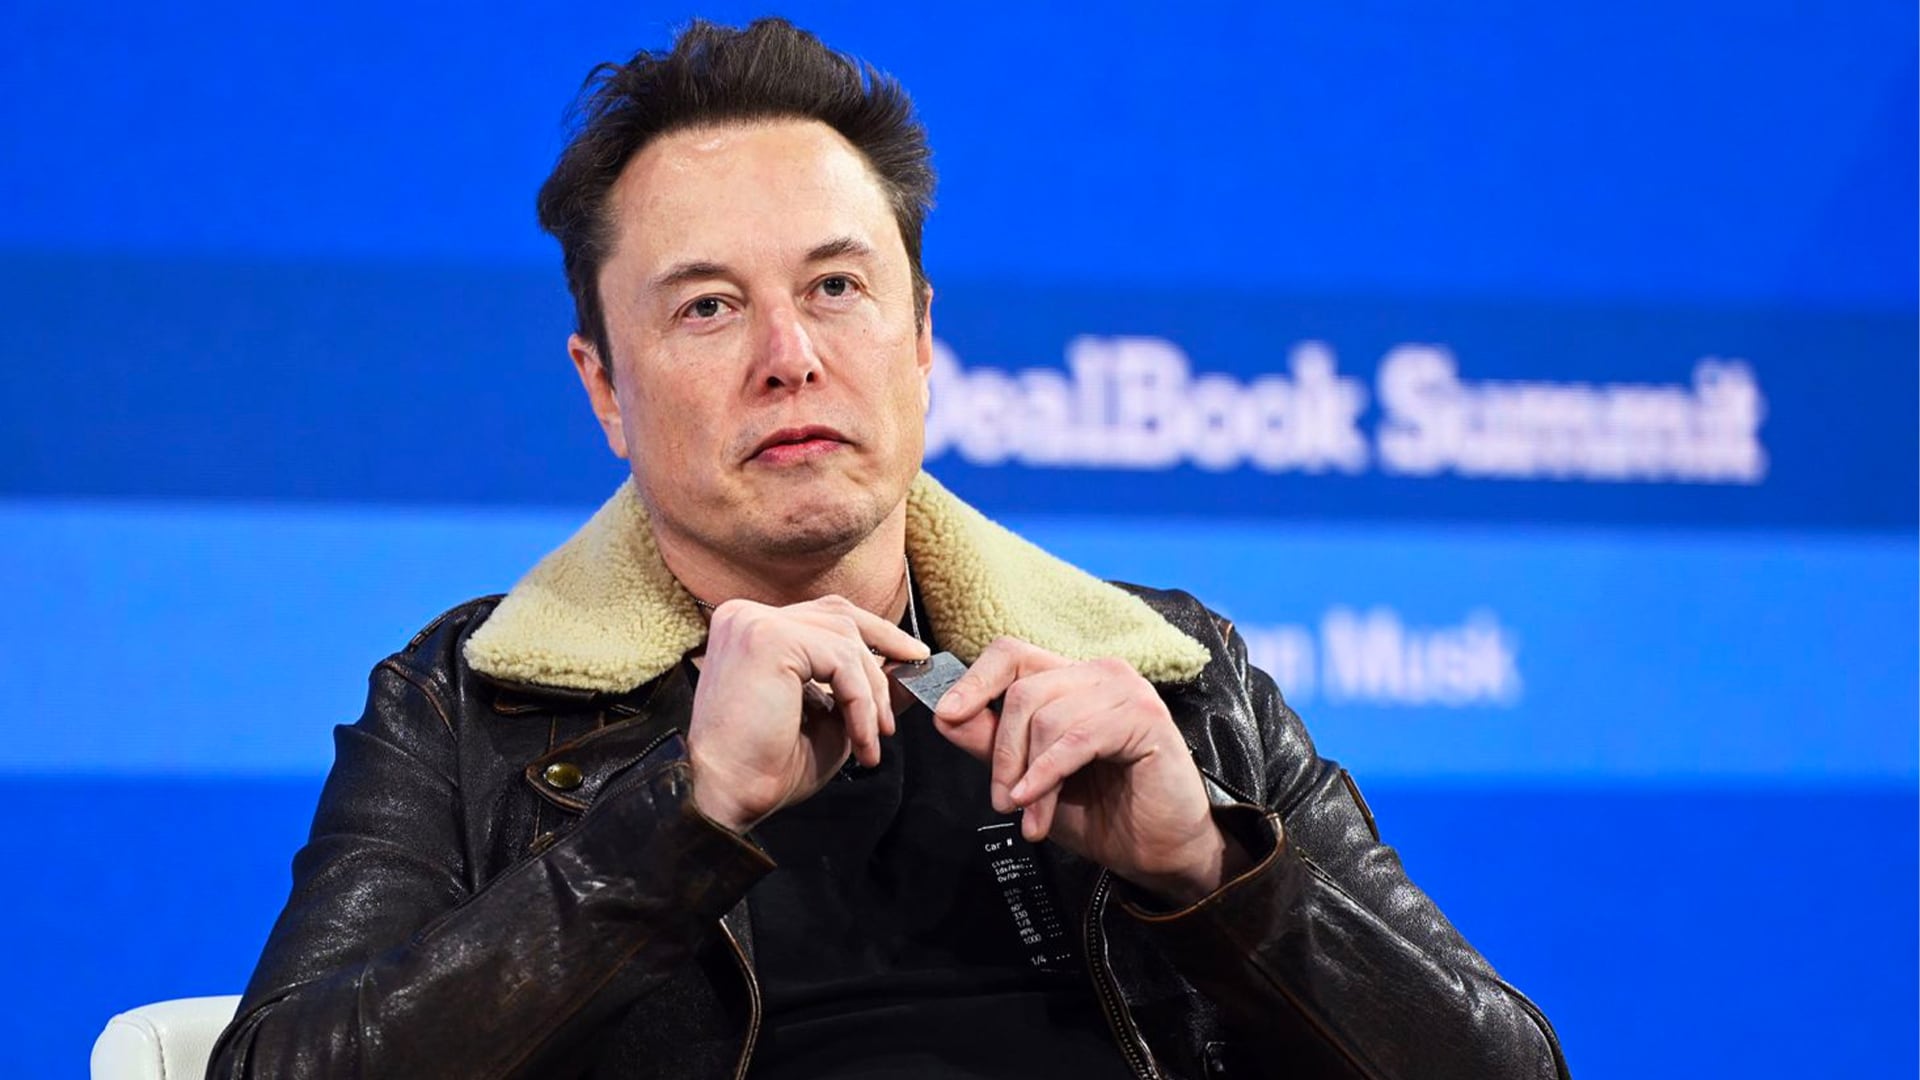 X may miss revenue projection by $1.4 billion as Elon Musk keeps scaring advertisers away – Firstpost